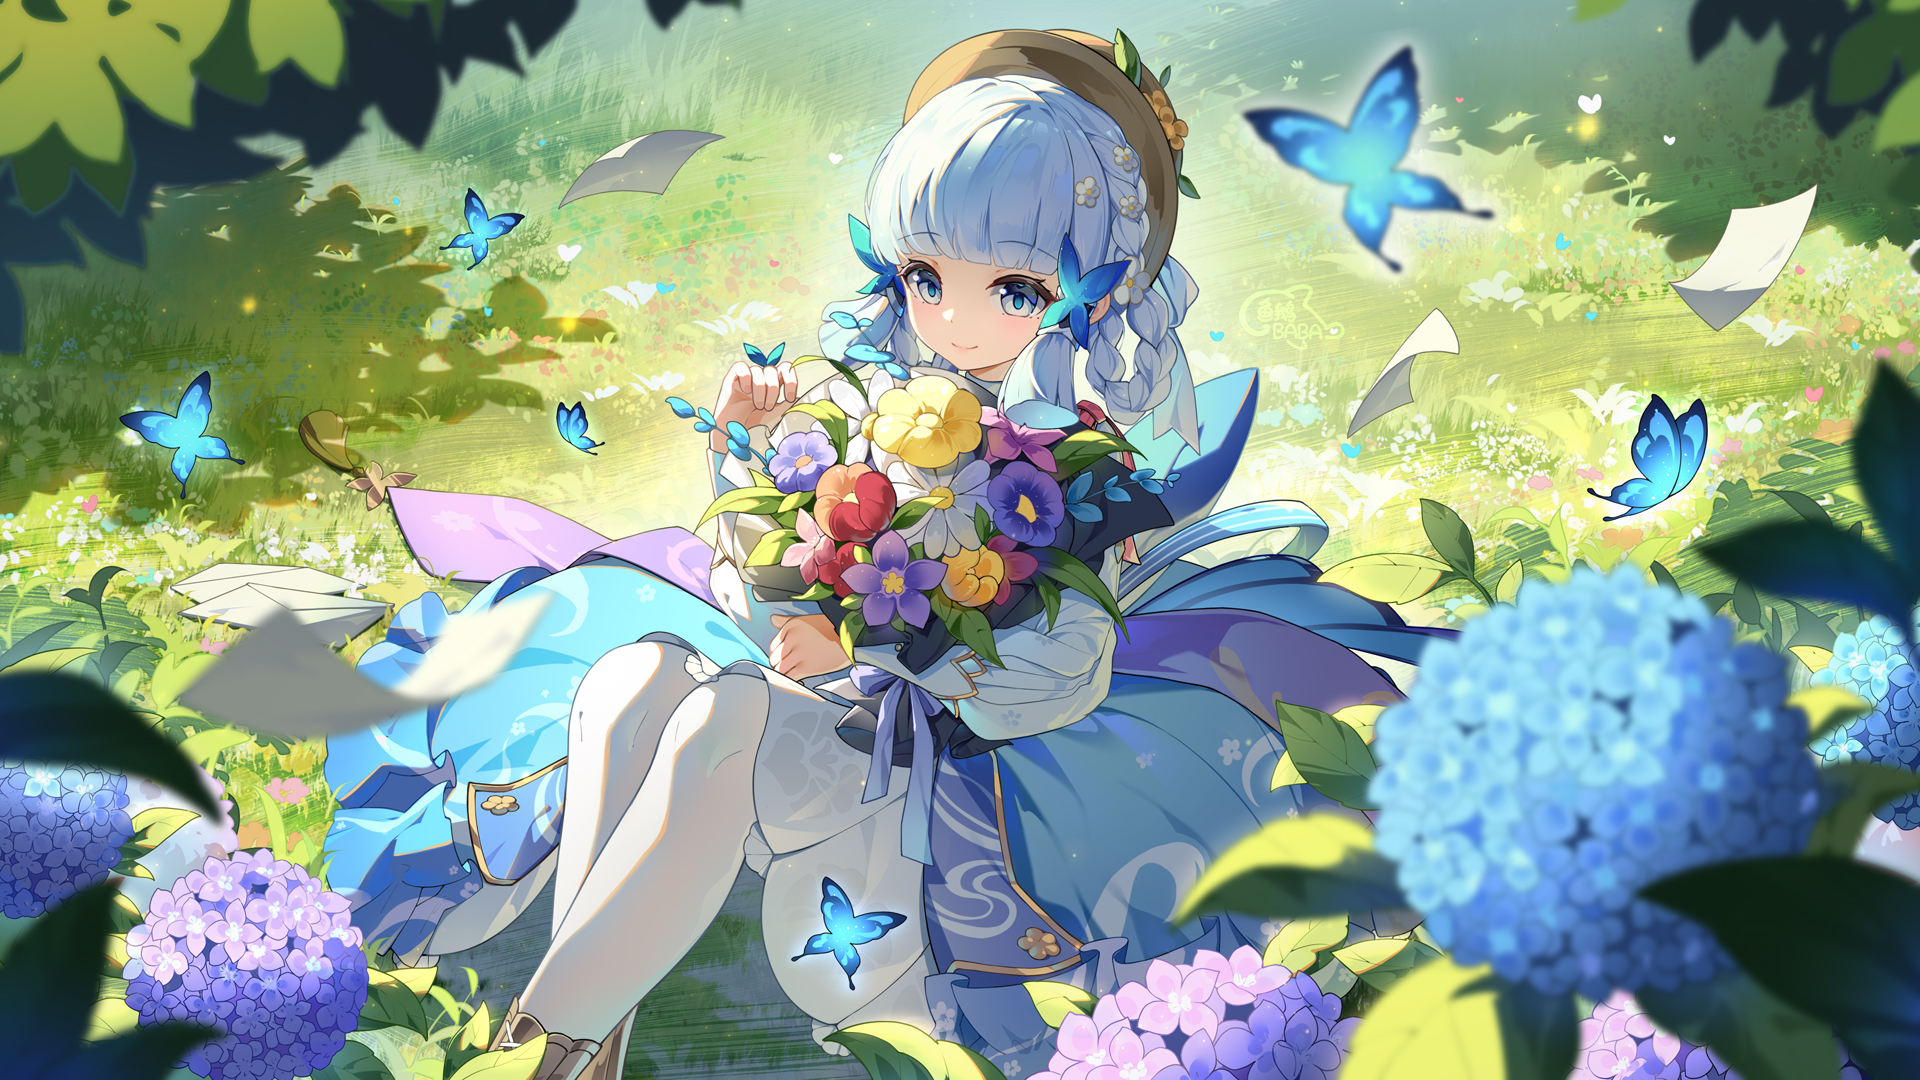 Anime 1920x1080 anime anime girls Kamisato Ayaka (Genshin Impact) Genshin Impact butterfly outdoors women outdoors closed mouth insect on the floor hair tubes sunlight blue hair blue eyes flowers leaves sitting hat women with hats ground on the ground Yu e baba flower in hair bangs letter grass dress bent legs paper